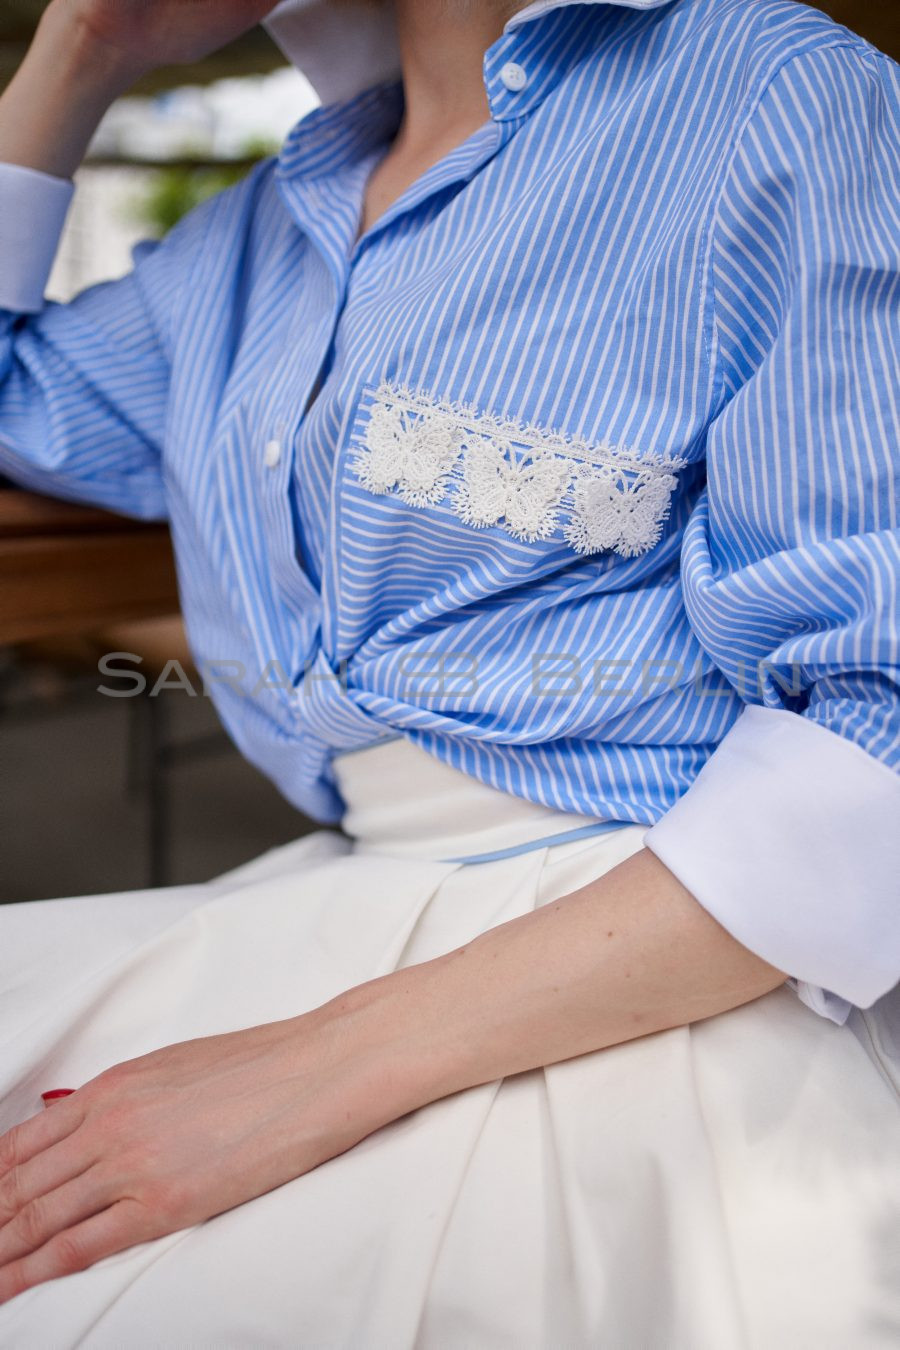 Oversized cotton shirt with white cuffs and collar, with butterfly lace